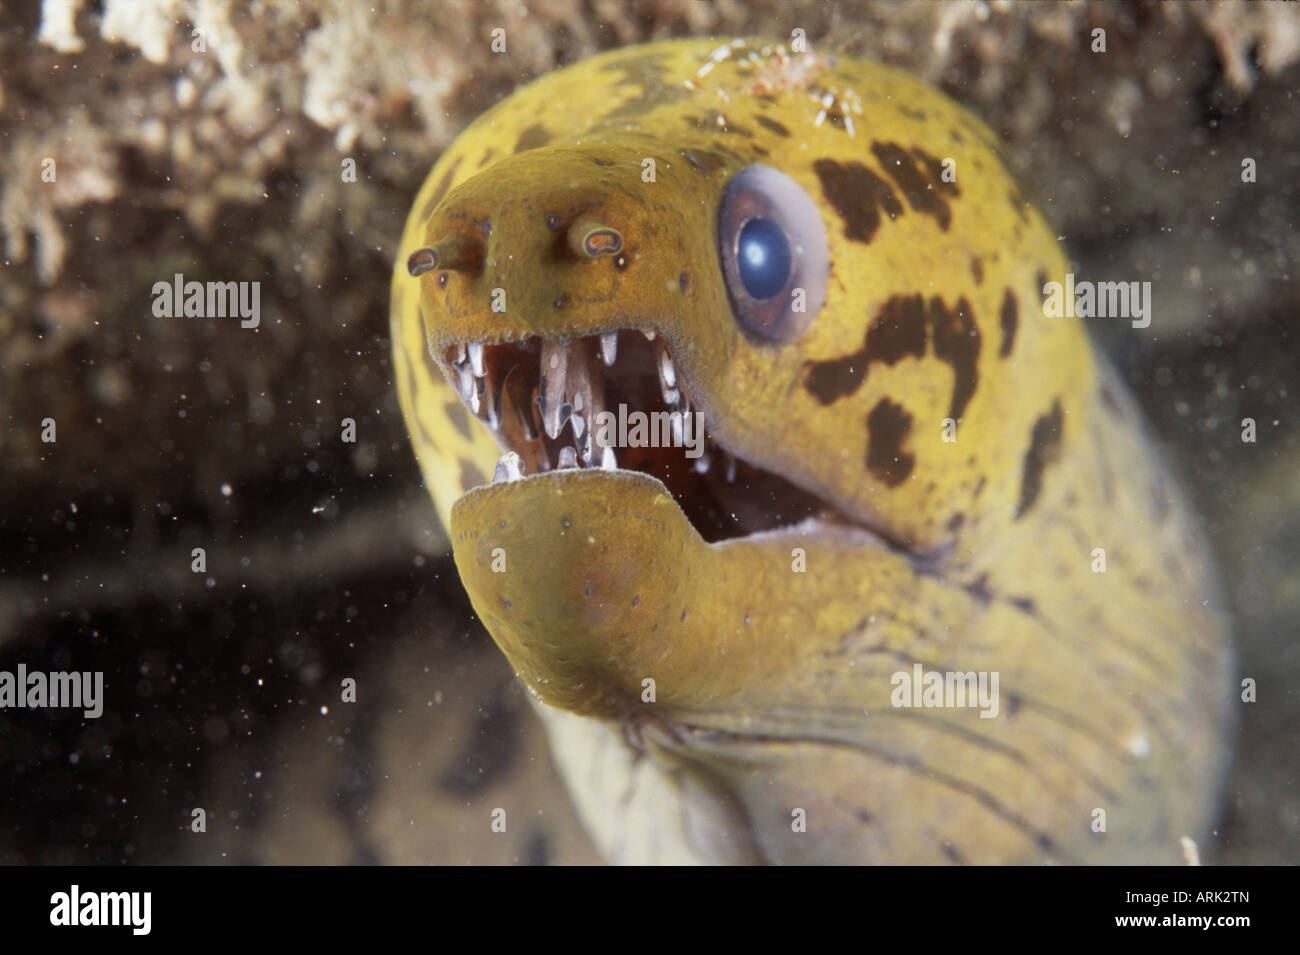 Close-up of a Spotted Moray eel (Gymnothorax fimbriatus) Stock Photo